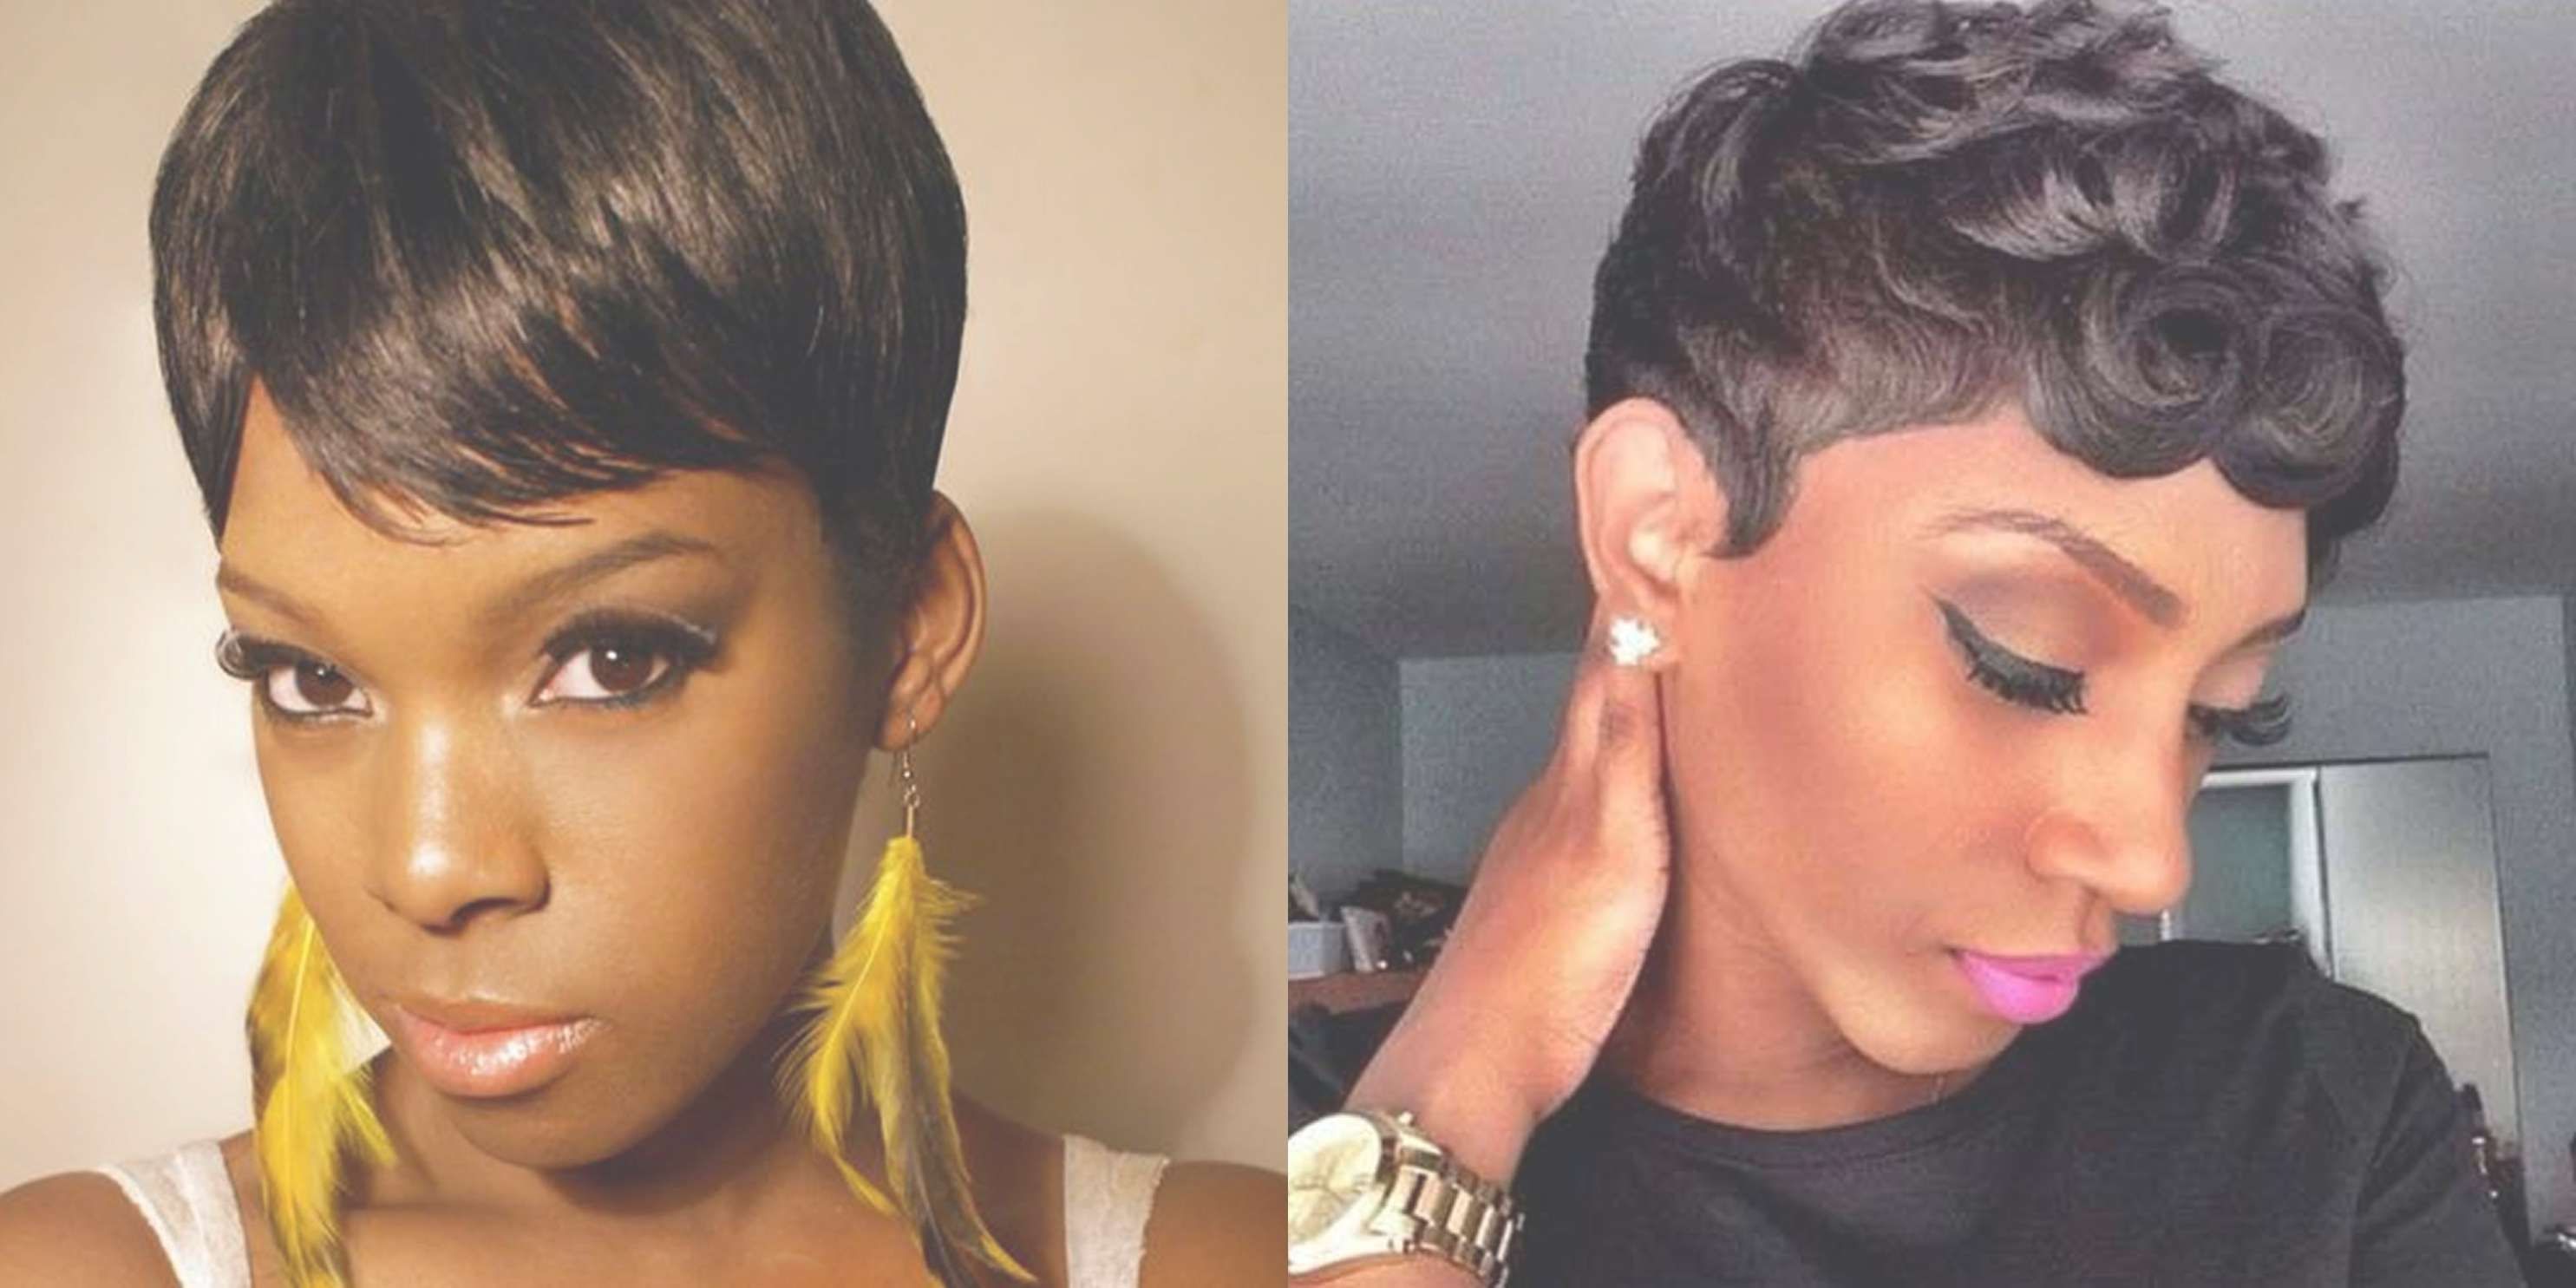 Hairstyles ~ 100 [ Short Pixie Hairstyles ] | Short Pixie With Best And Newest Black Short Pixie Hairstyles (View 6 of 15)